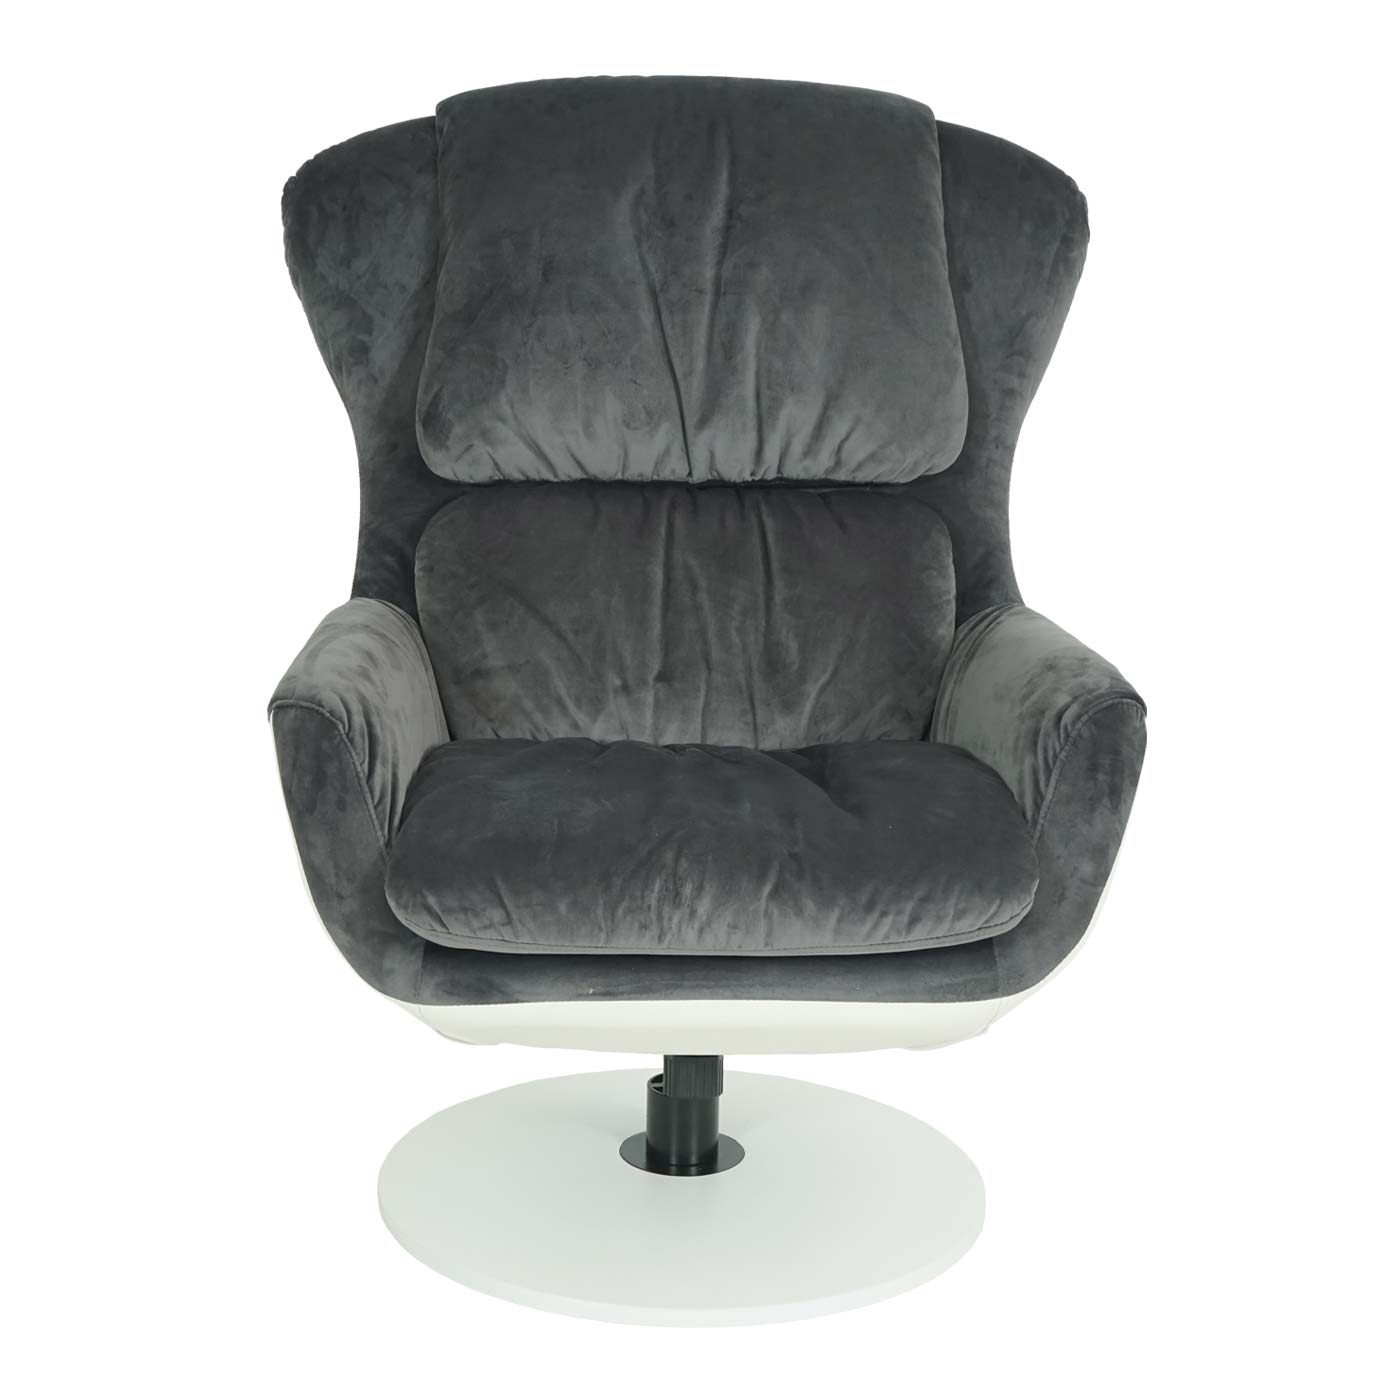 Relaxsessel HWC-E52 Frontalansicht